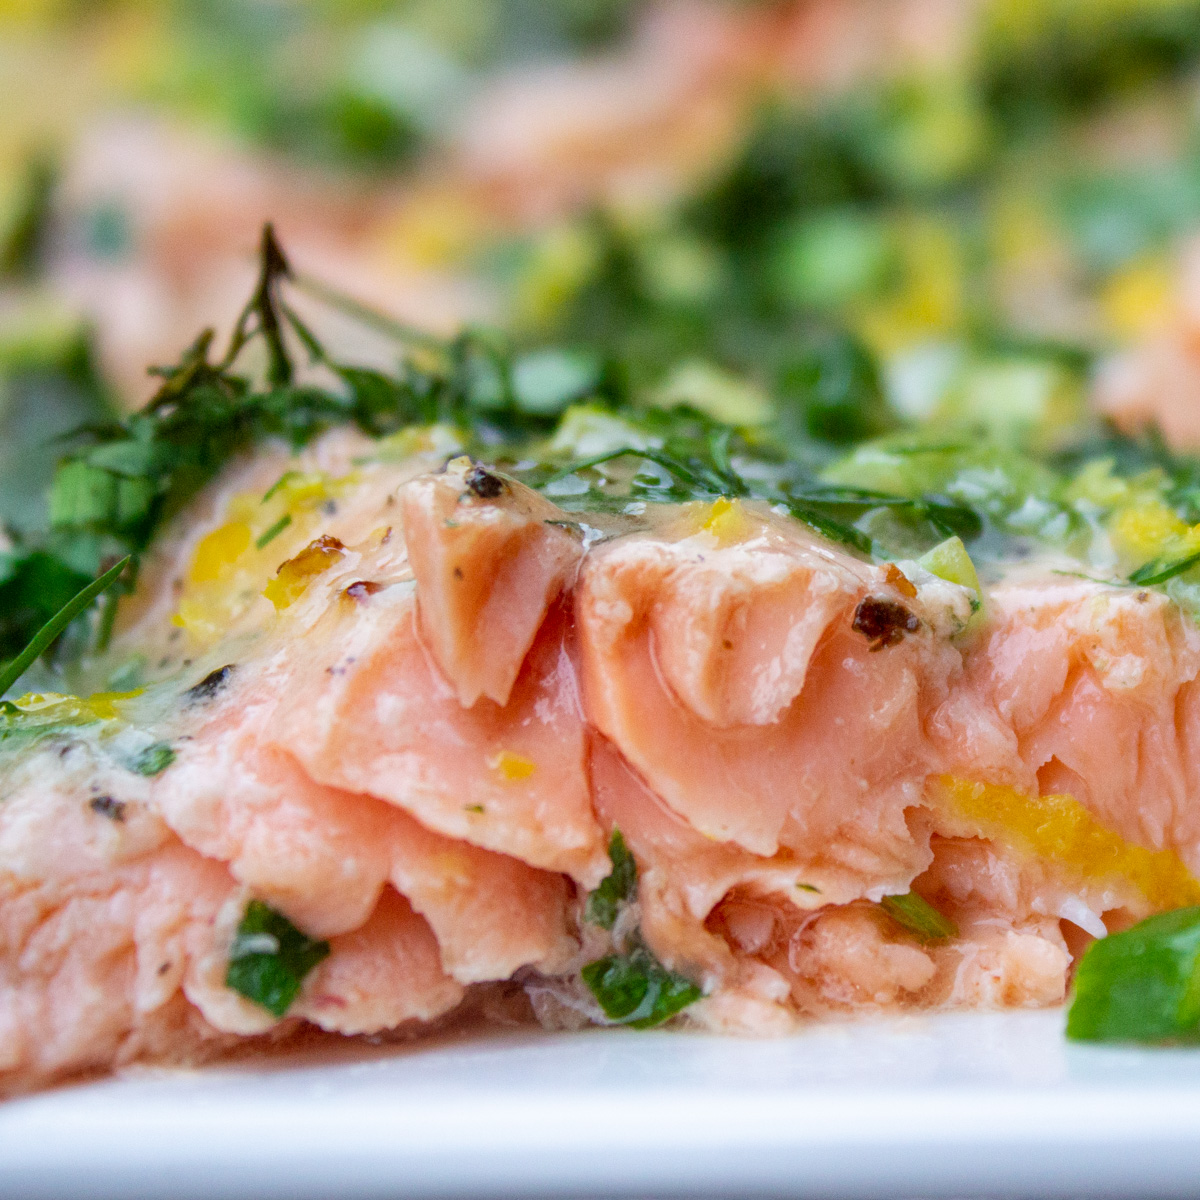 Baked Trout With Lemon, Butter & Herbs